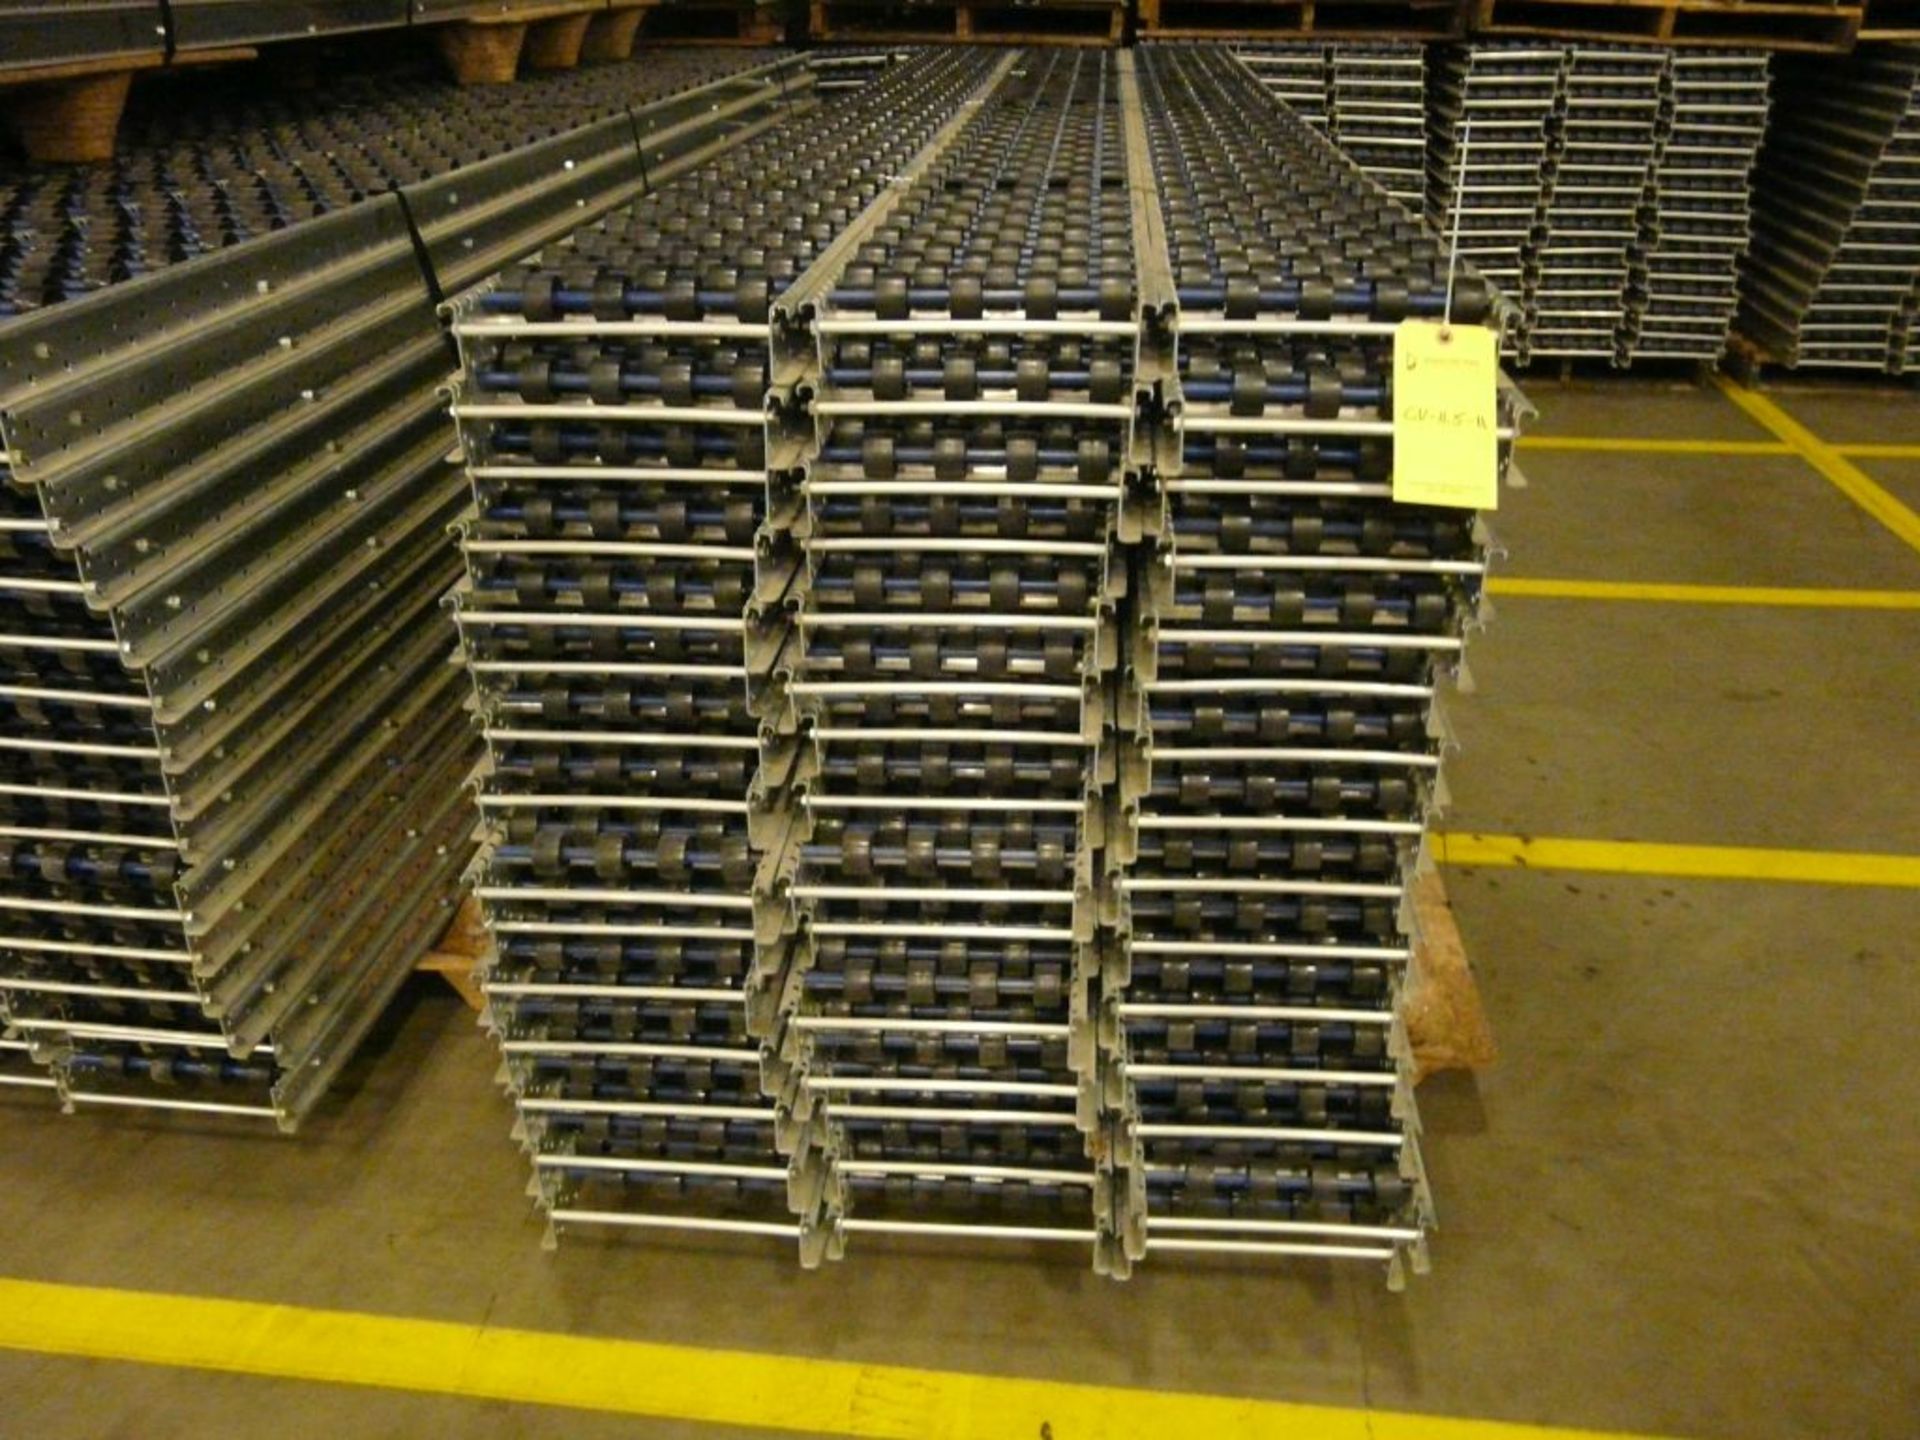 Lot of (90) SpanTrack Wheelbed Carton Flow Conveyors - 11.5'L x 11"W; Tag: 223612 - $30 Lot - Image 2 of 4